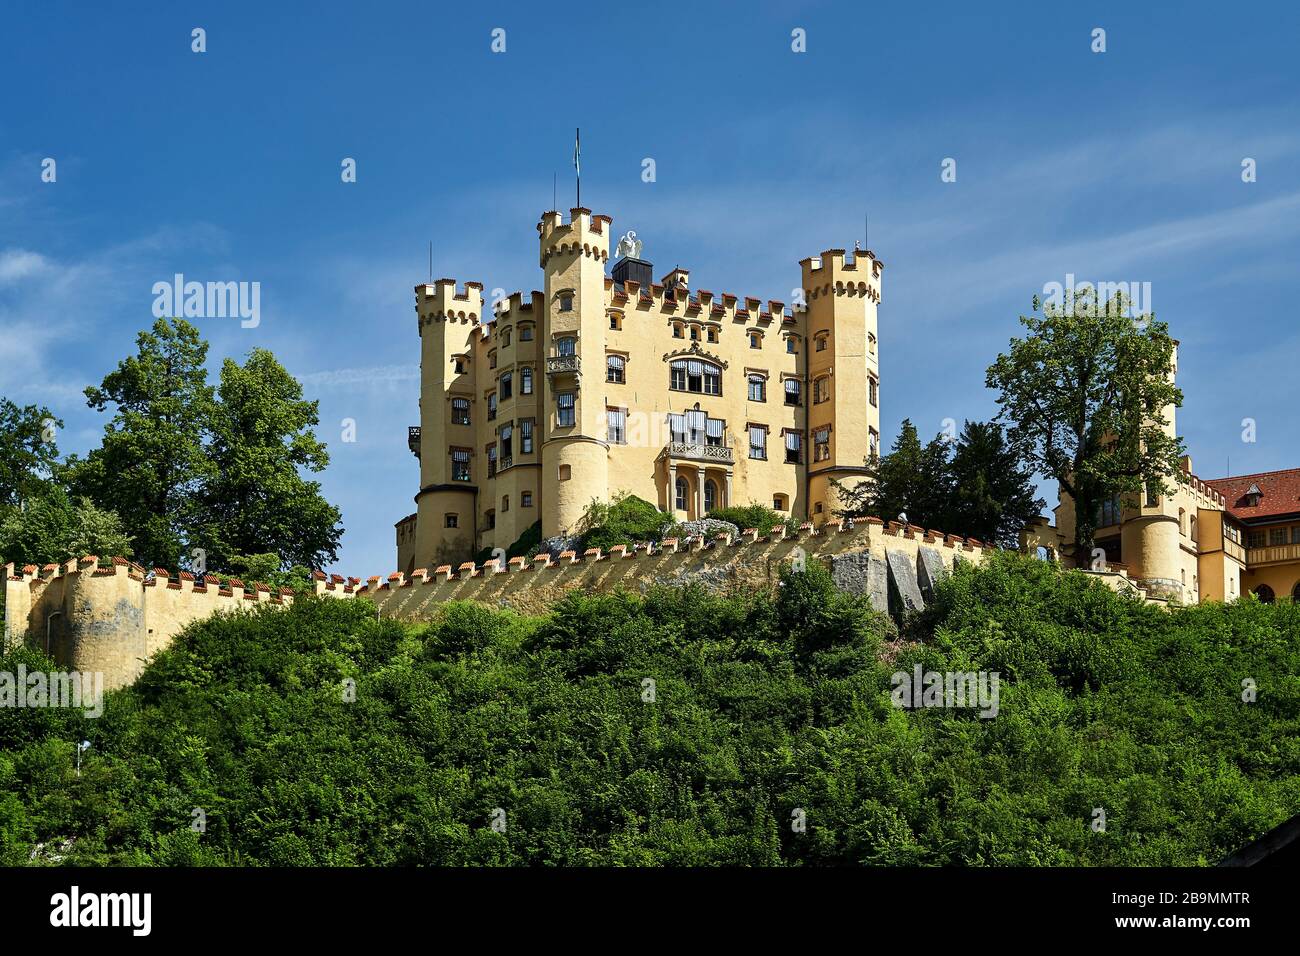 A view of a Hoehenschwangau castle on top of a hille on a sunny summer day against a blue sky and green foliage bellow the castle wall. Stock Photo